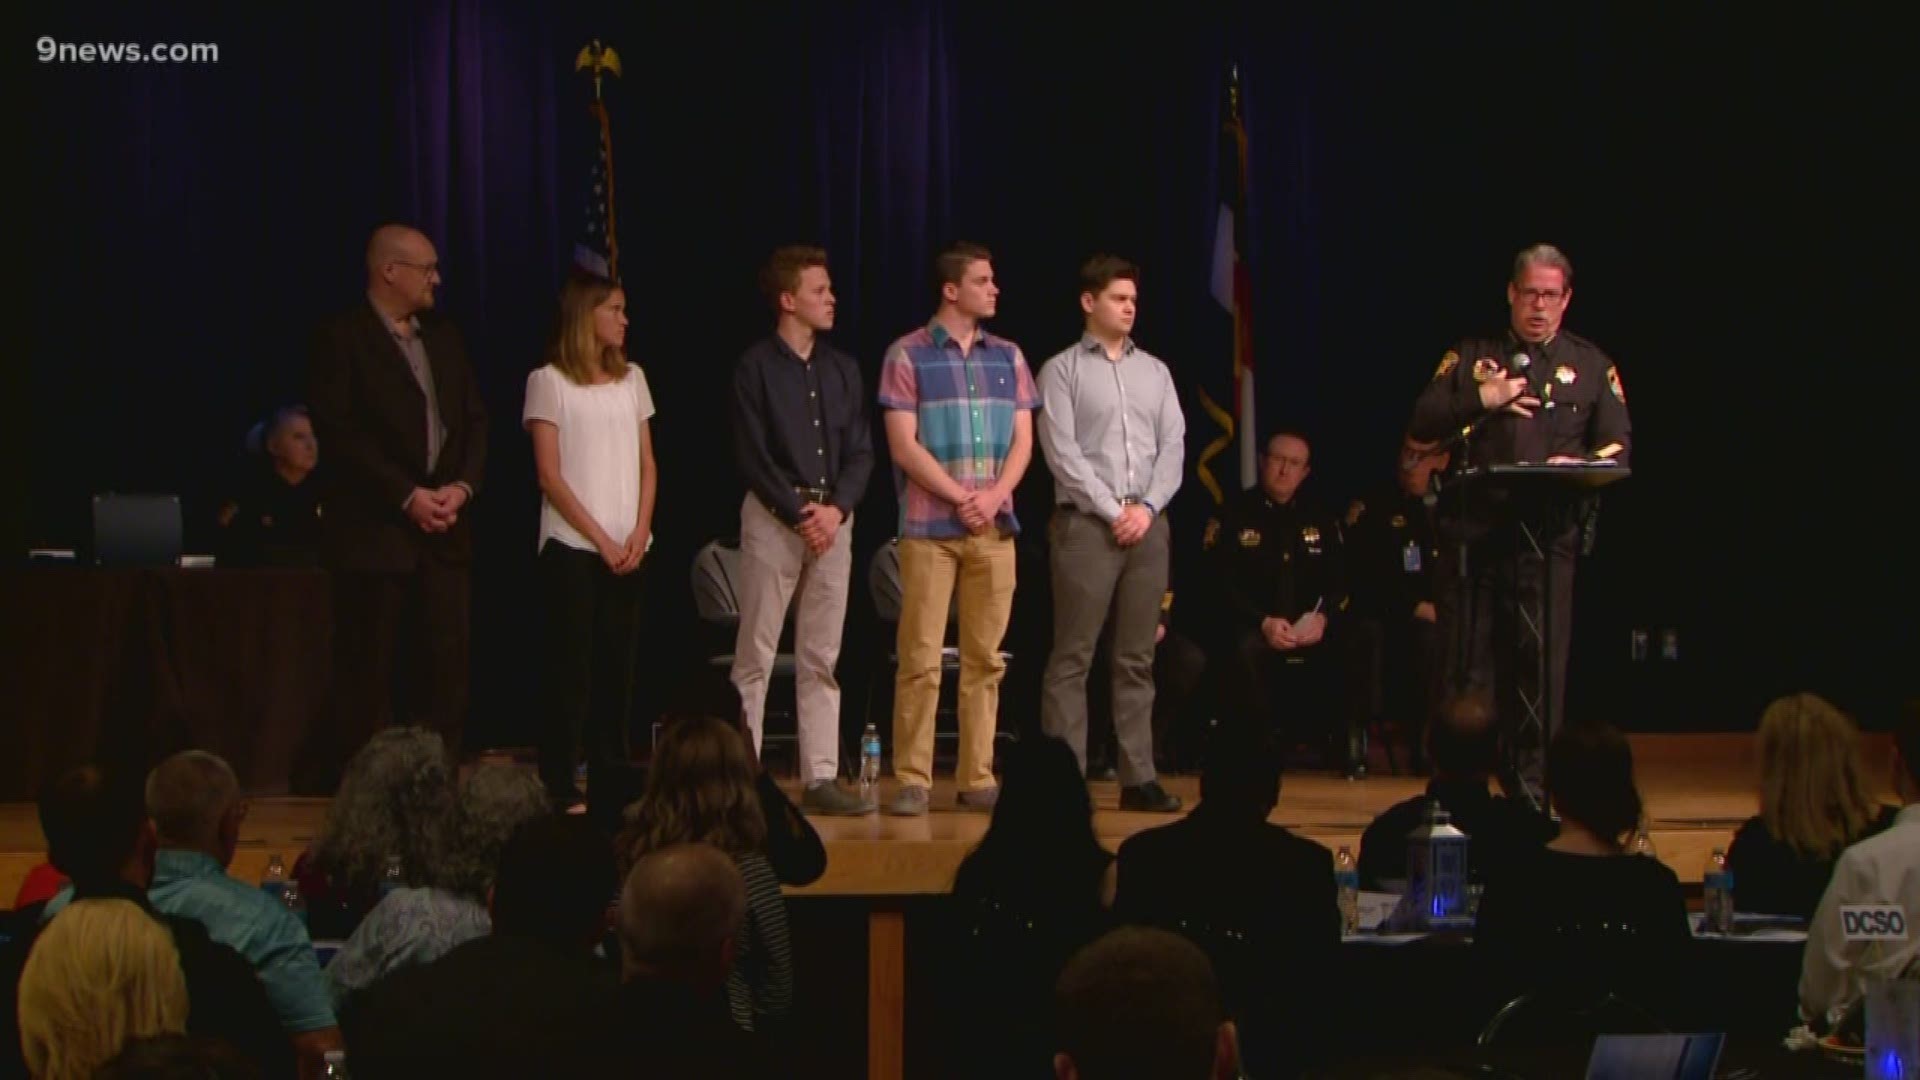 A night that usually recognizes the actions of Douglas County deputies also honored the heroes from the STEM School Highlands Ranch shooting.